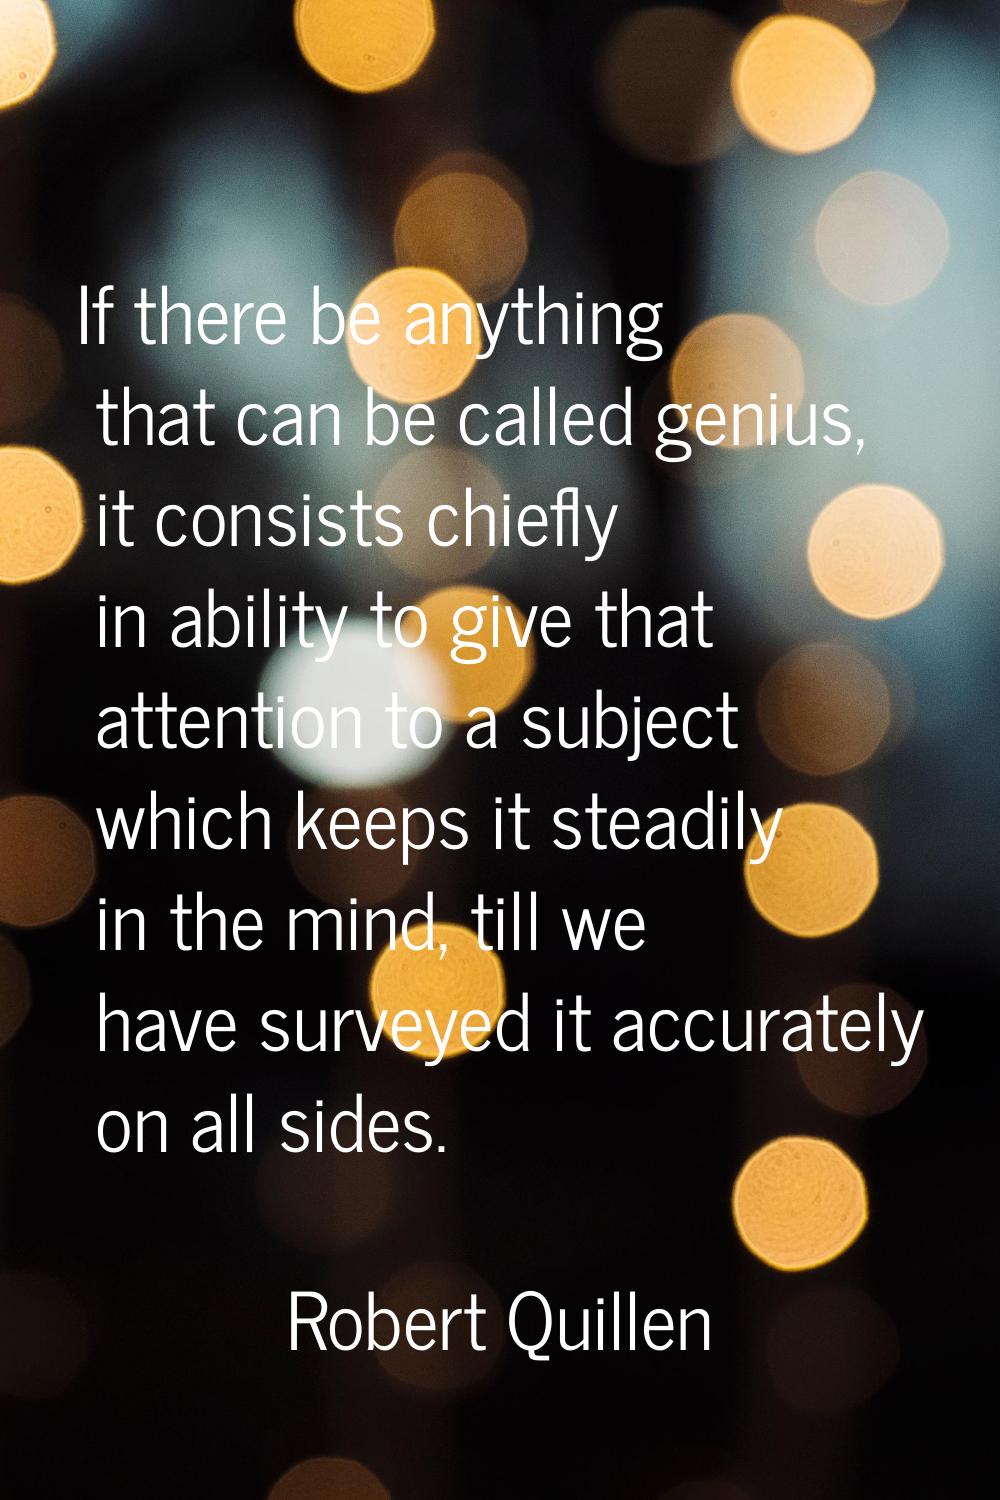 If there be anything that can be called genius, it consists chiefly in ability to give that attenti